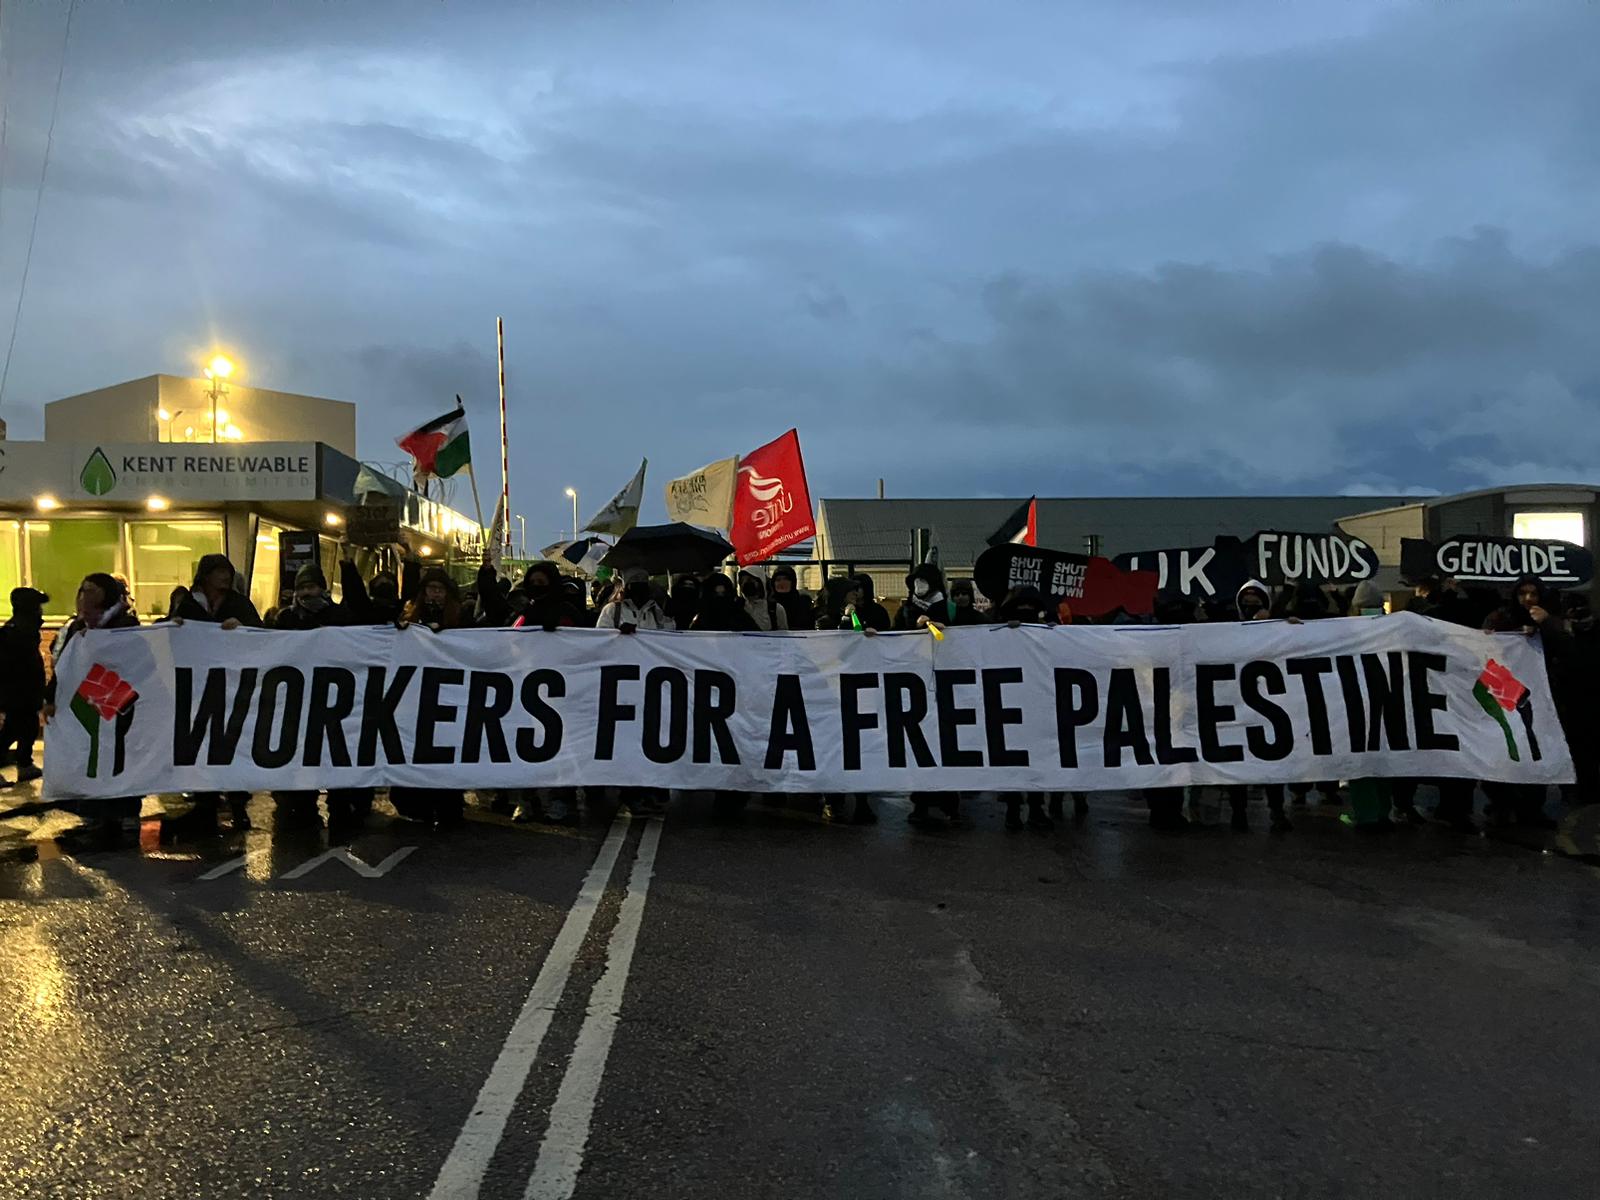 British workers say they have responded to a call by Palestinian trade unions to “Stop Israeli war crimes"